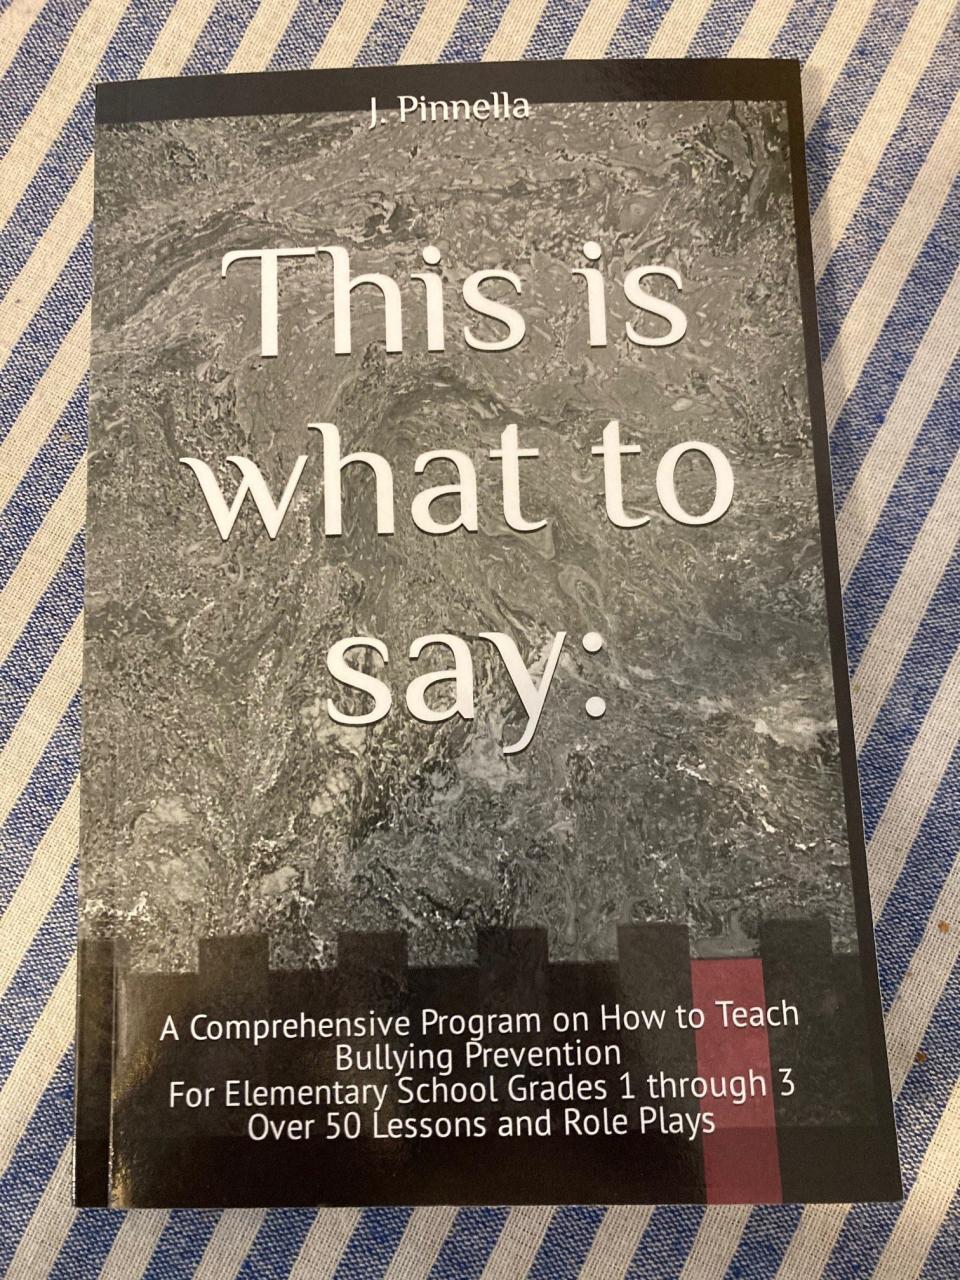 Jennifer Pinnella's book  – "This is what to say"  – was published in December.